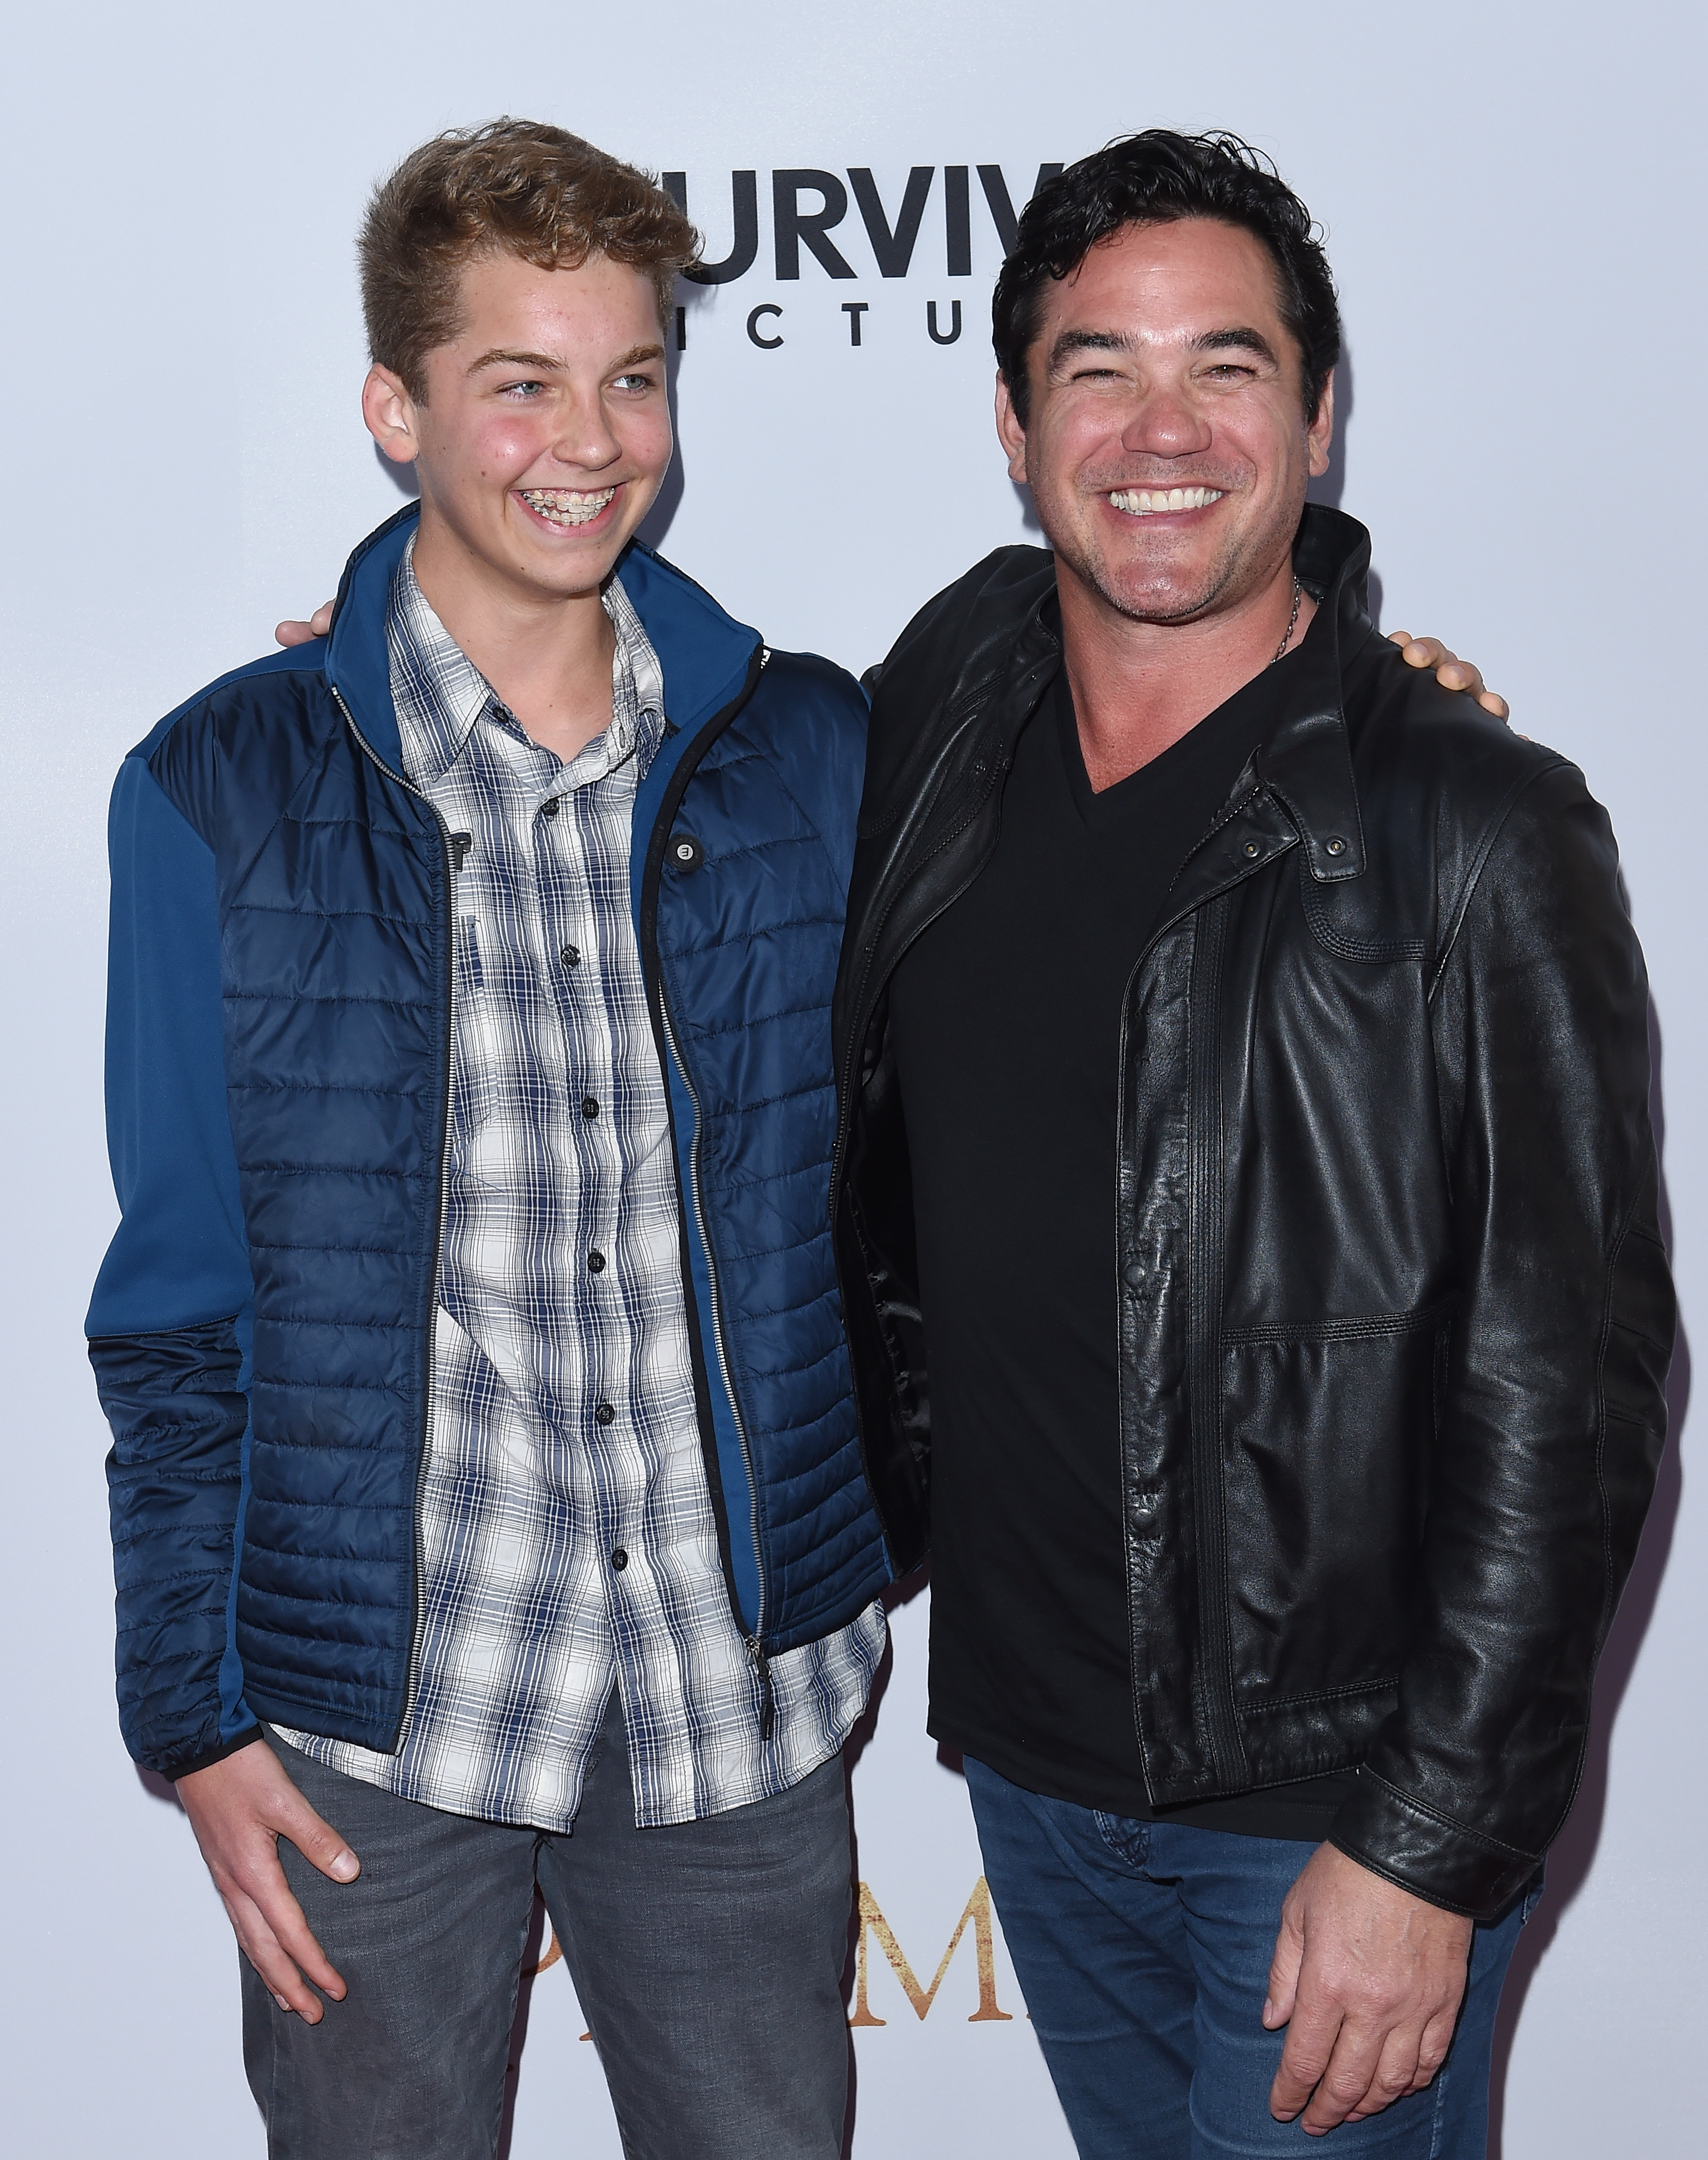 Christopher Cain and Dean Cain at the premiere of "The Promise," 2017 | Source: Getty Images